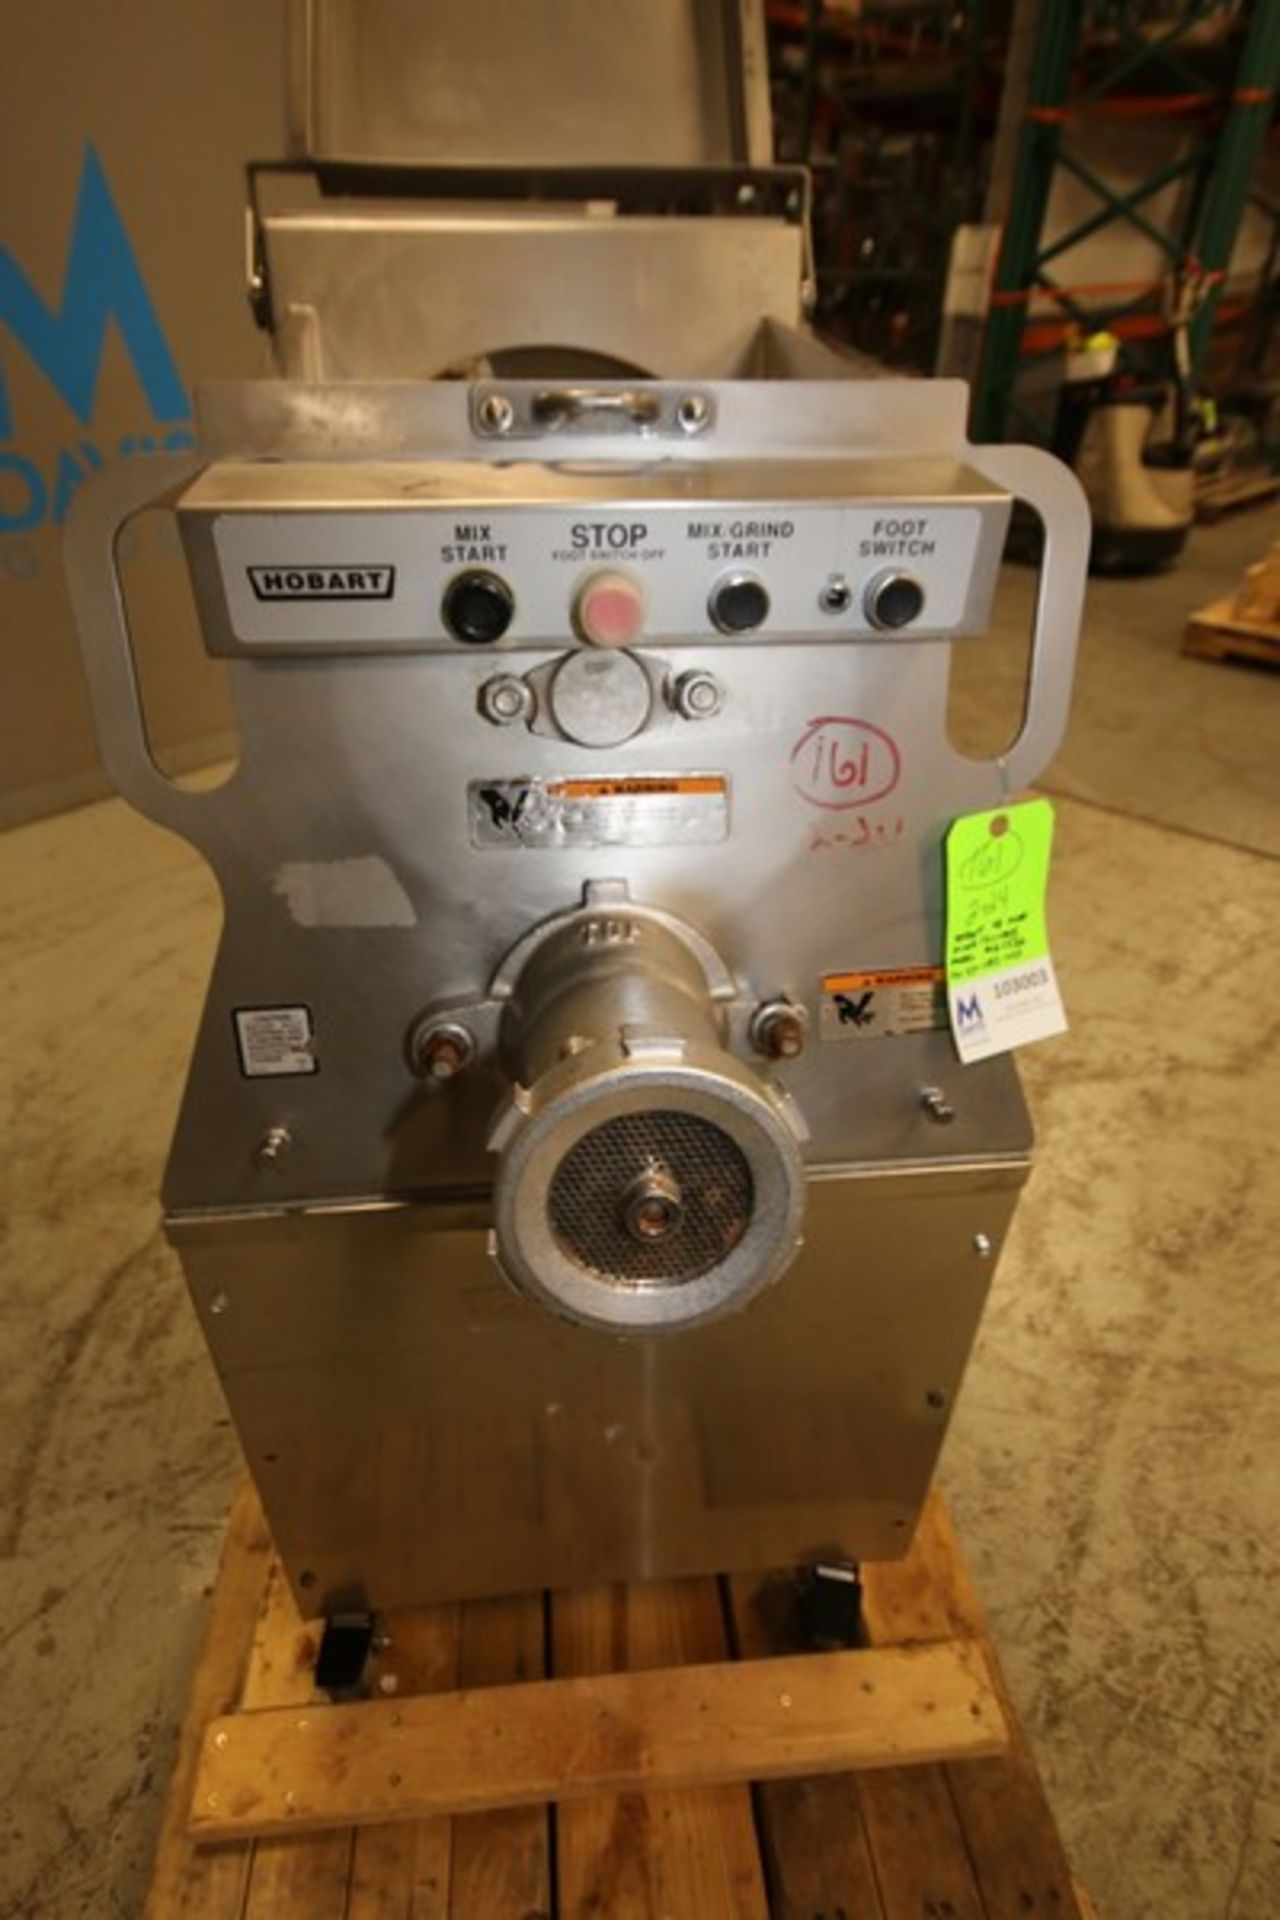 Hobart S/S 150 lb. Capacity Portable Meat Mixer / Grinder, Model MG1532, SN 27-1183-453, with - Image 4 of 8